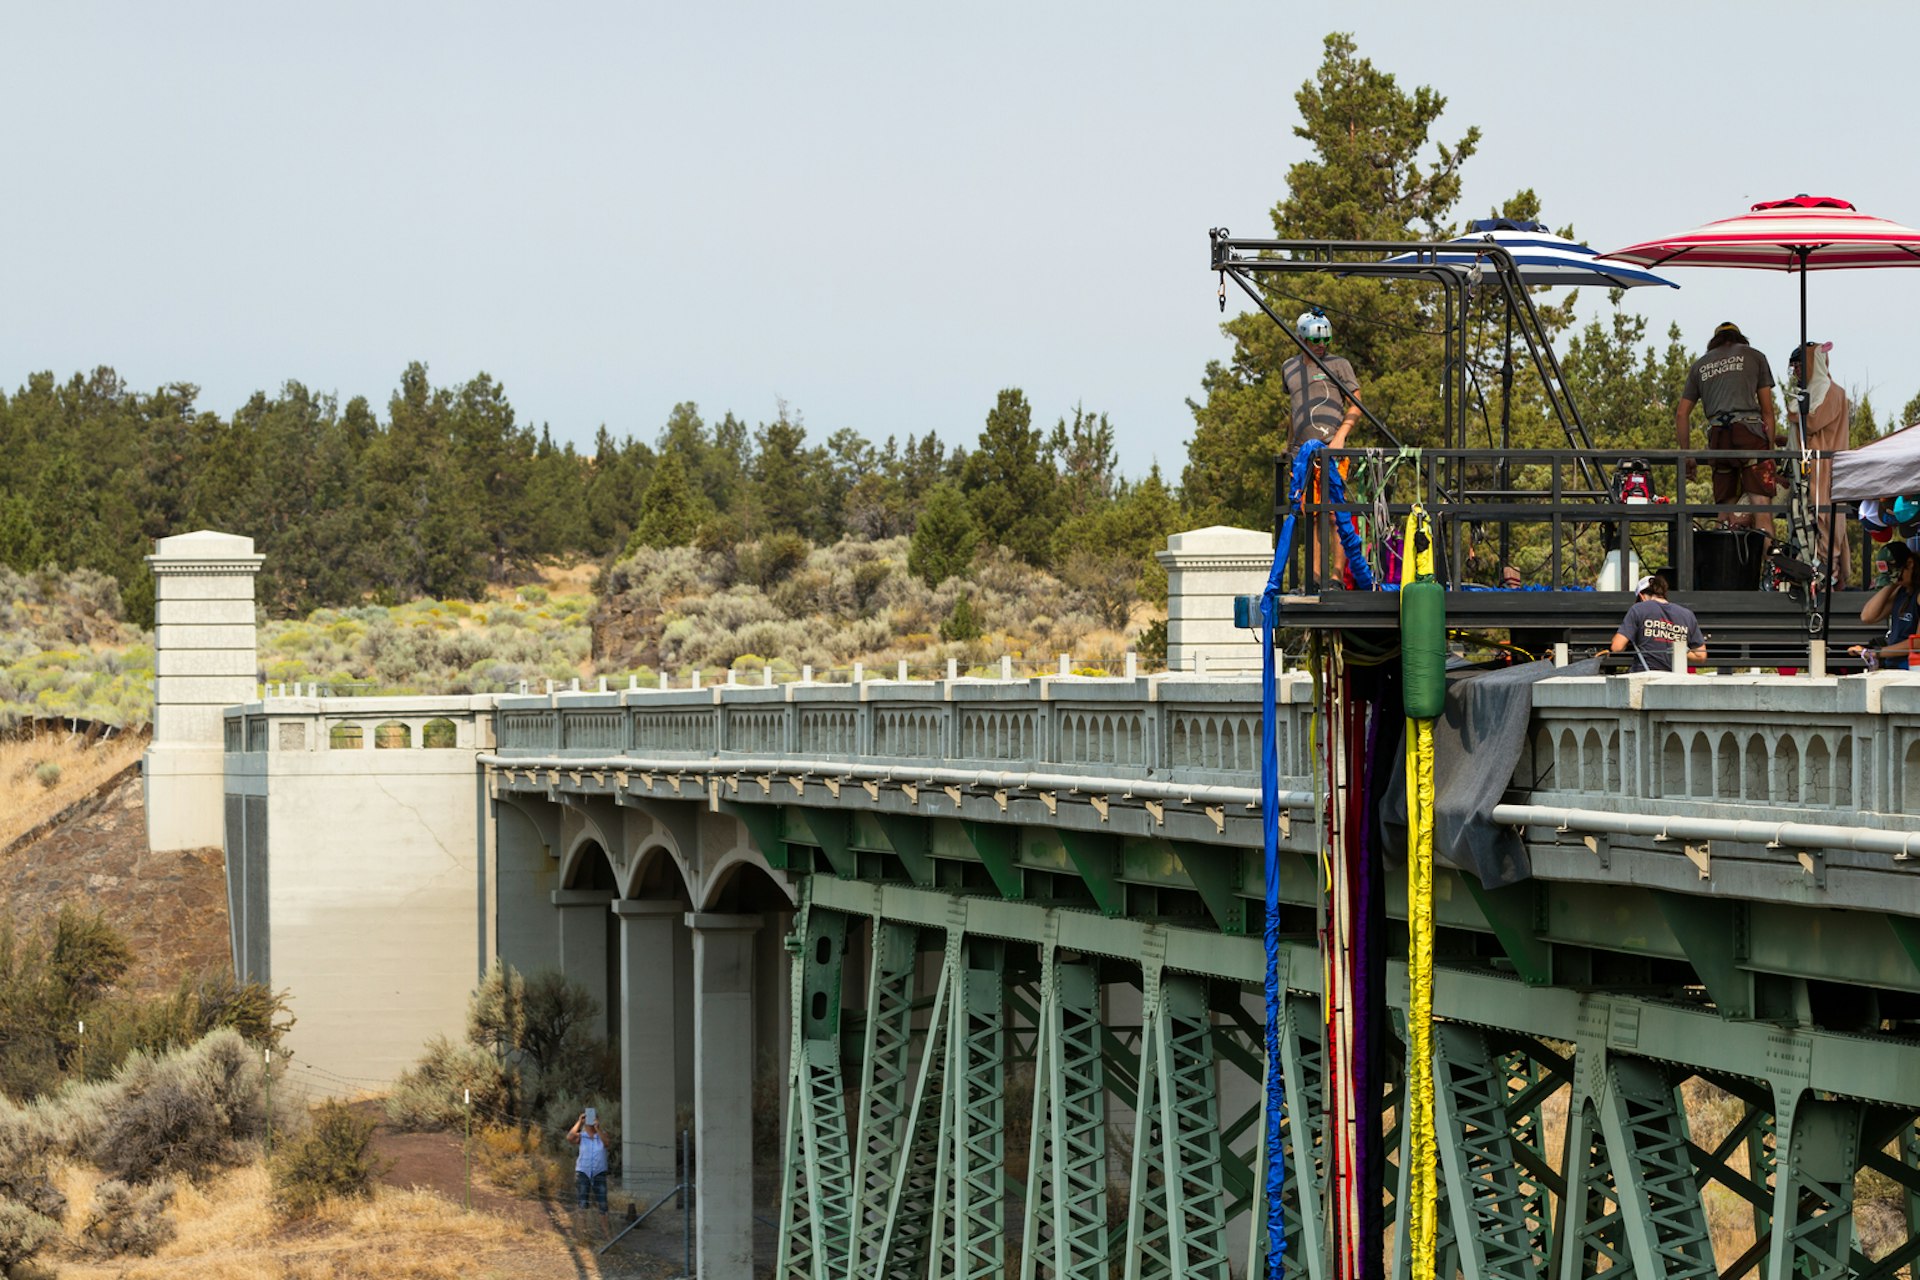 A person waits on a bungee jumping platform on a bridge with colorful bungee cords hanging nearby